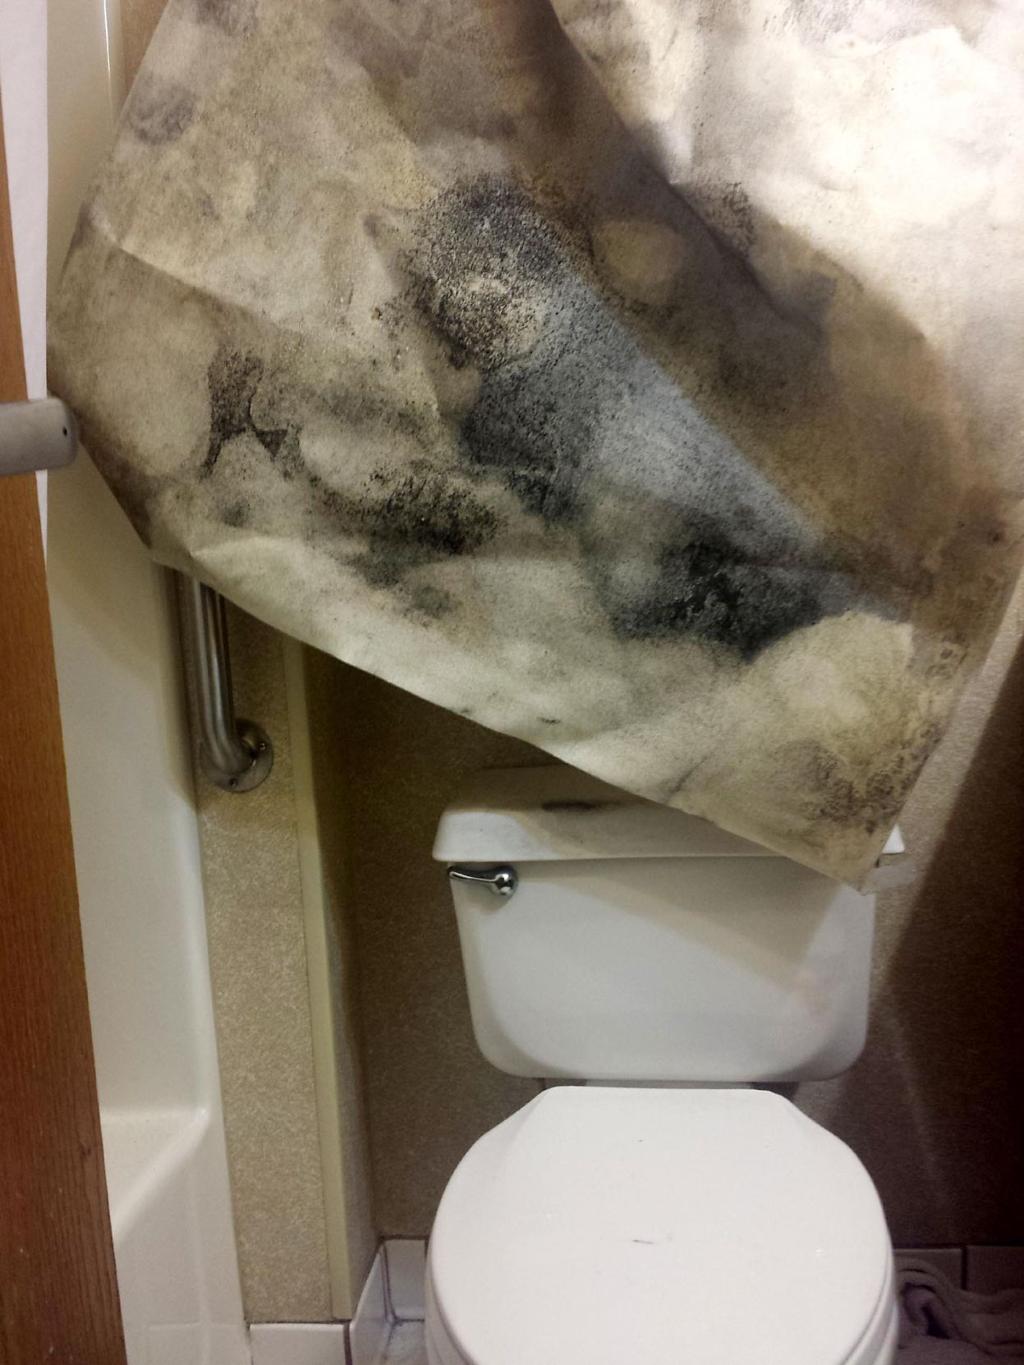 Hotel Guest Health Department Deal With Hotel Mold Local News Mankatofreepress Com